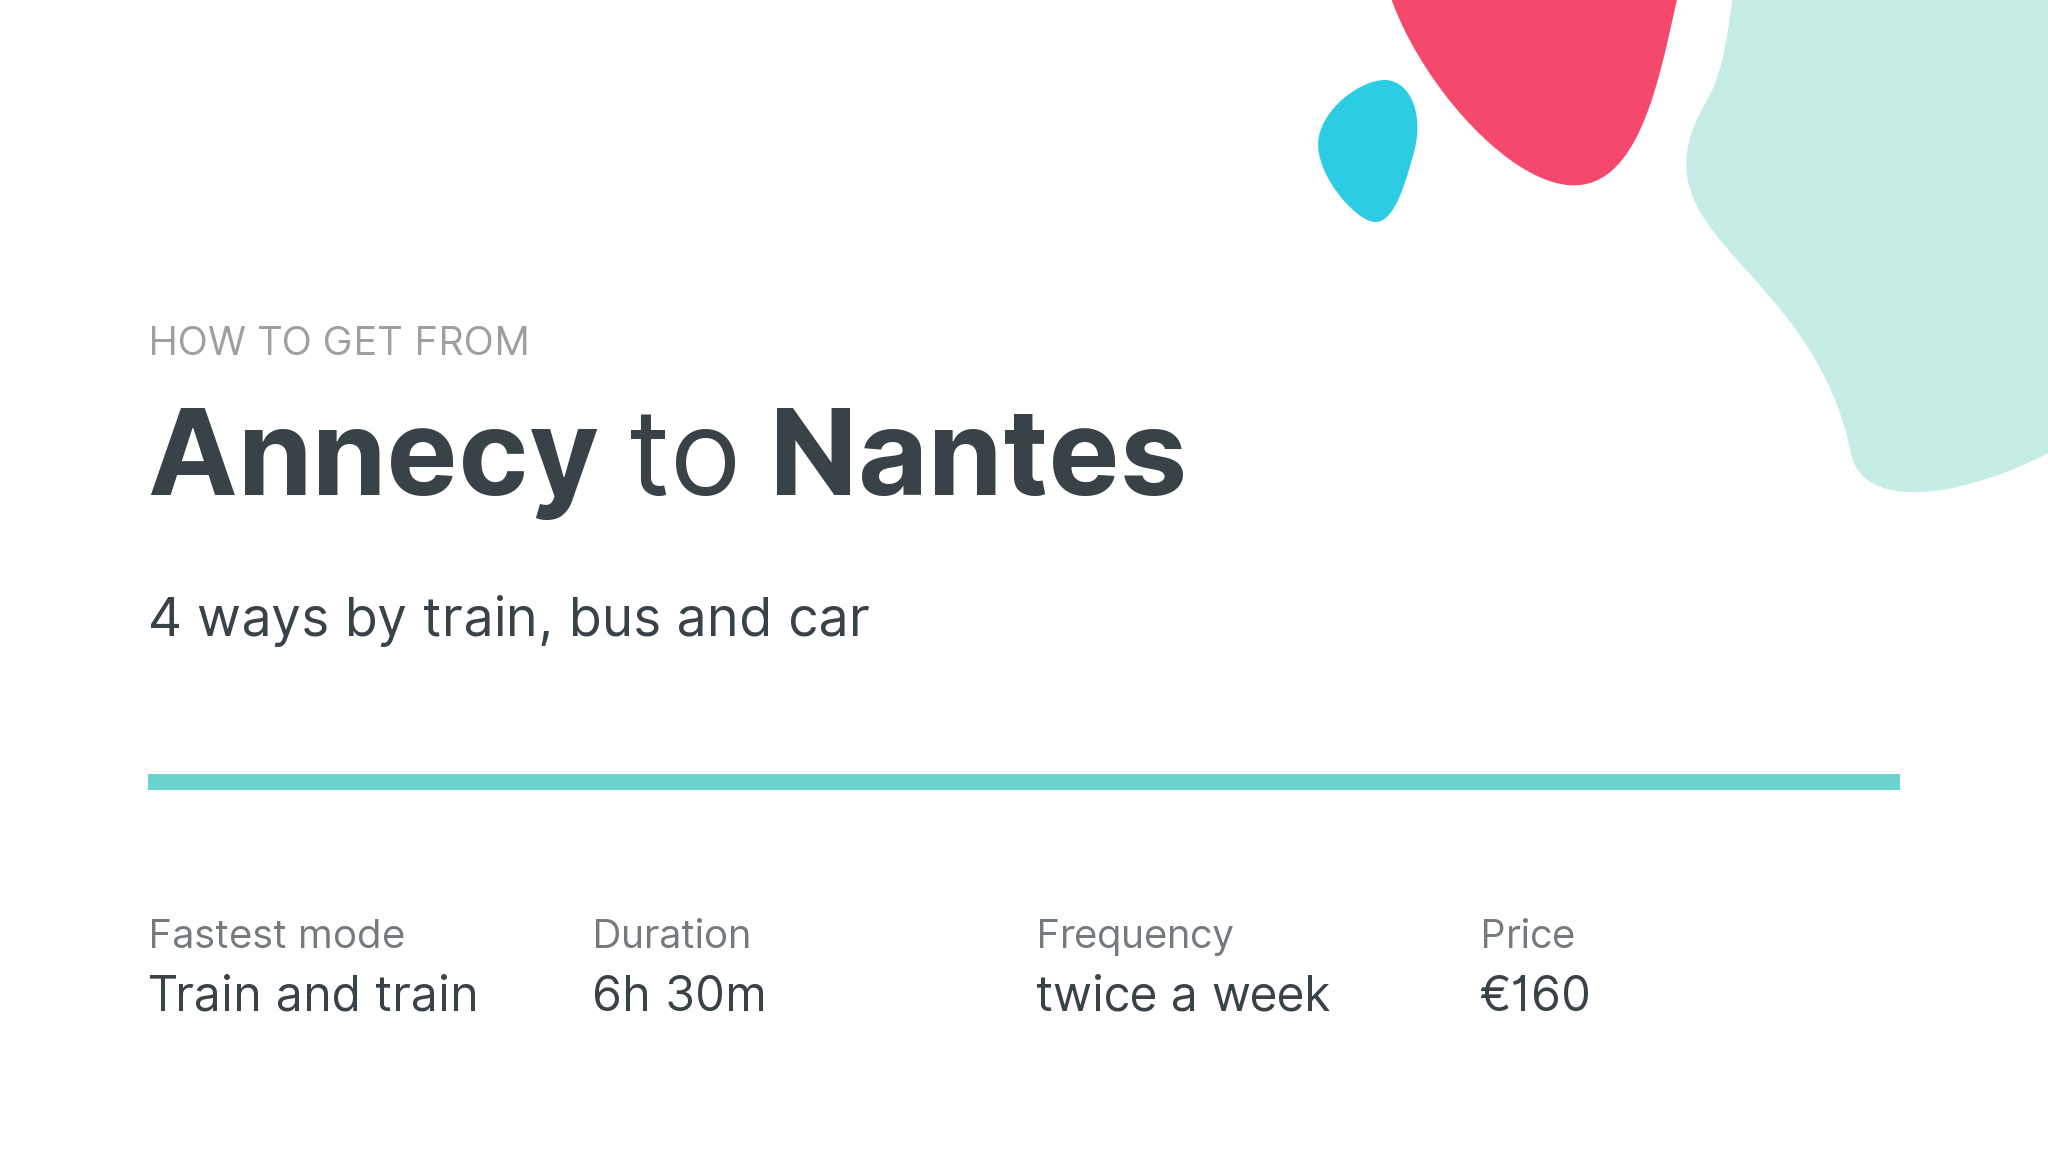 How do I get from Annecy to Nantes